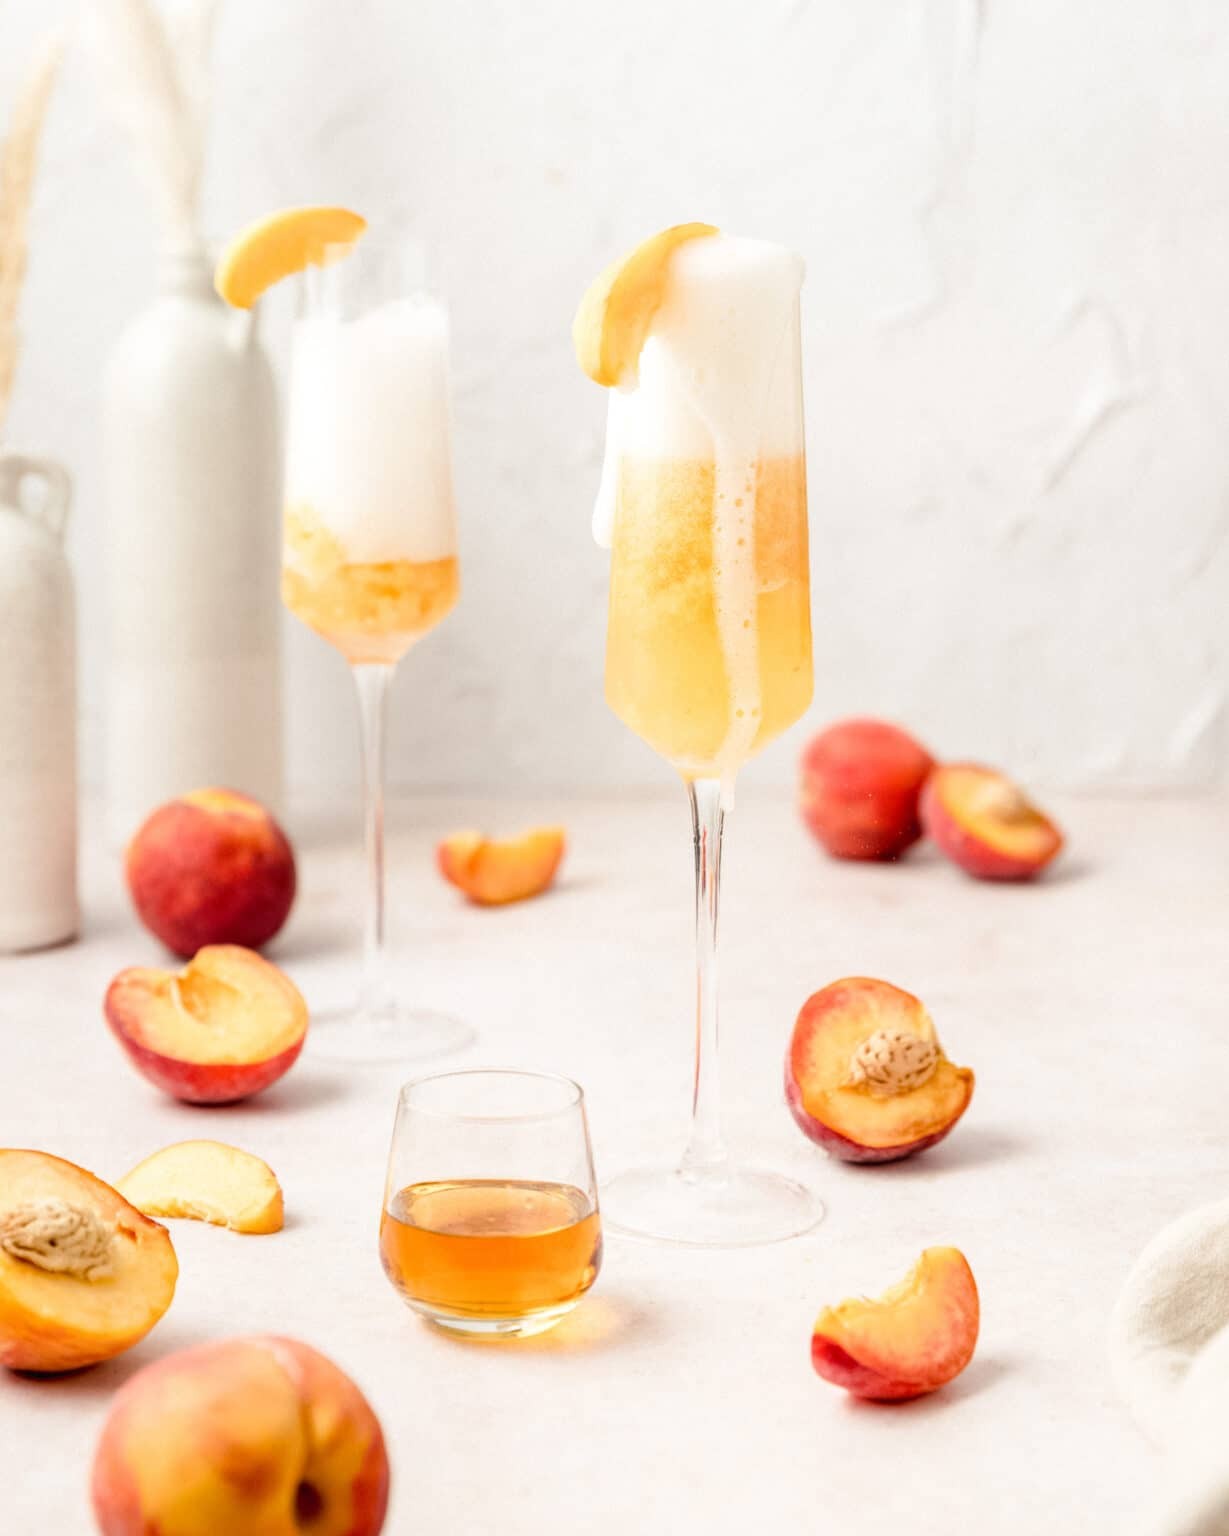 An iconic trio of peaches, triple sec, and champagne assemble to create the sweetest Easter cocktail you've ever had. The fresh fruit really embraces the spring season, so find the best peaches you can! (via Barley & Sage)